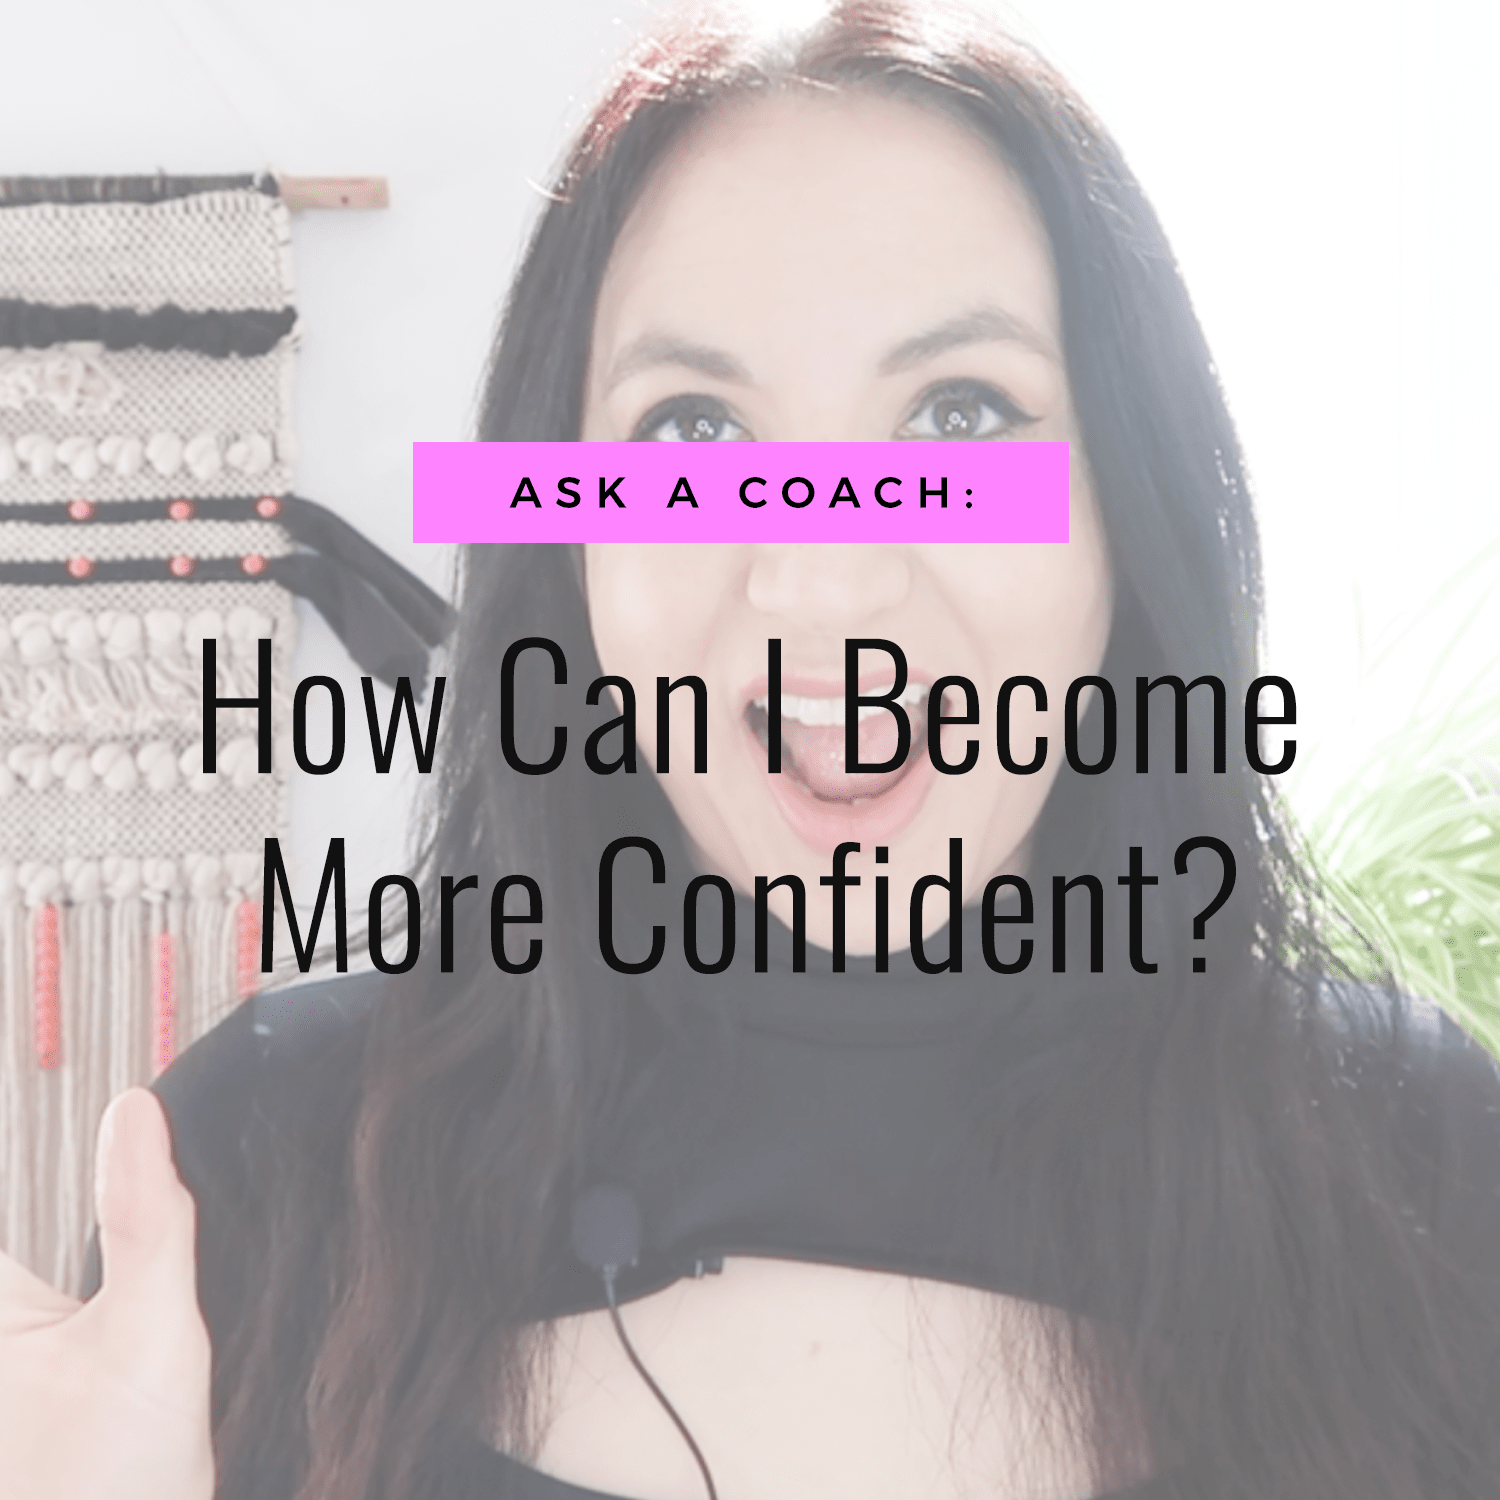 Video | Ask A Coach: How Can I Become More Confident? | The Aligned Life